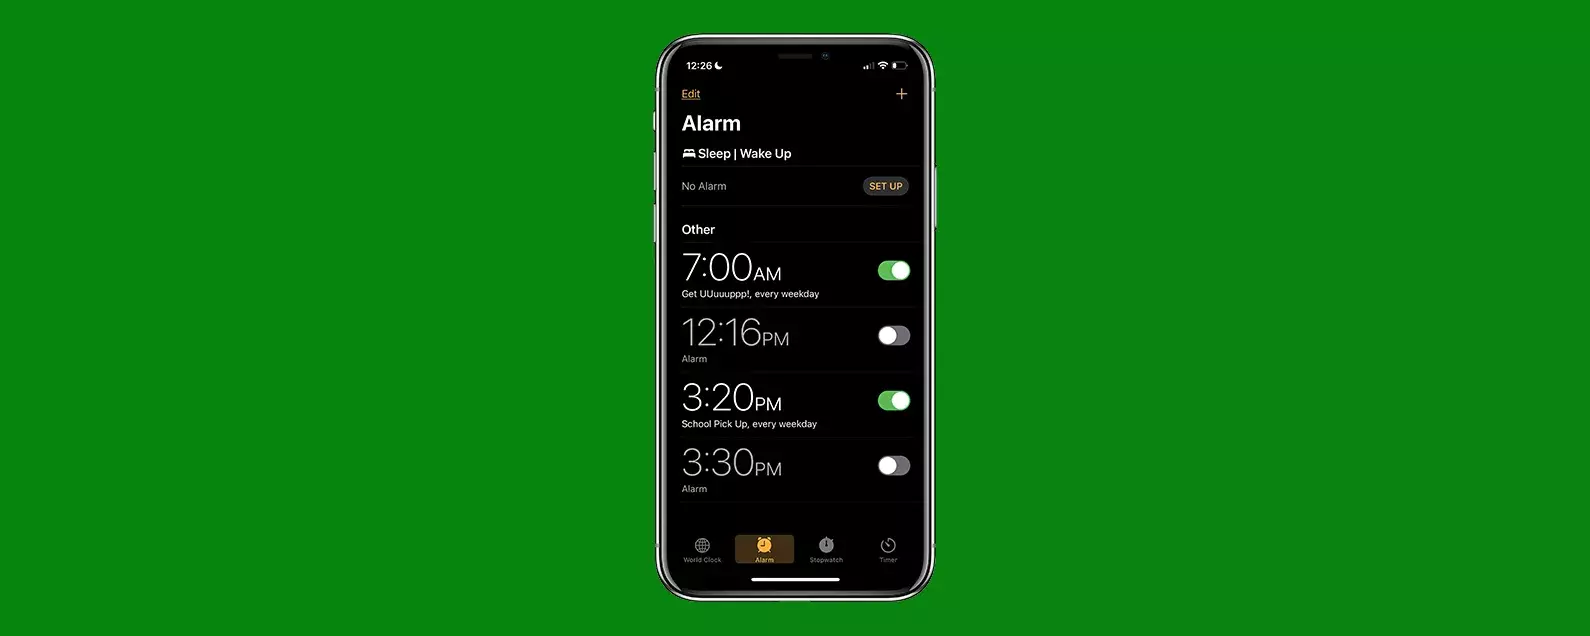 Backup Solutions for a Failed iPhone Alarm